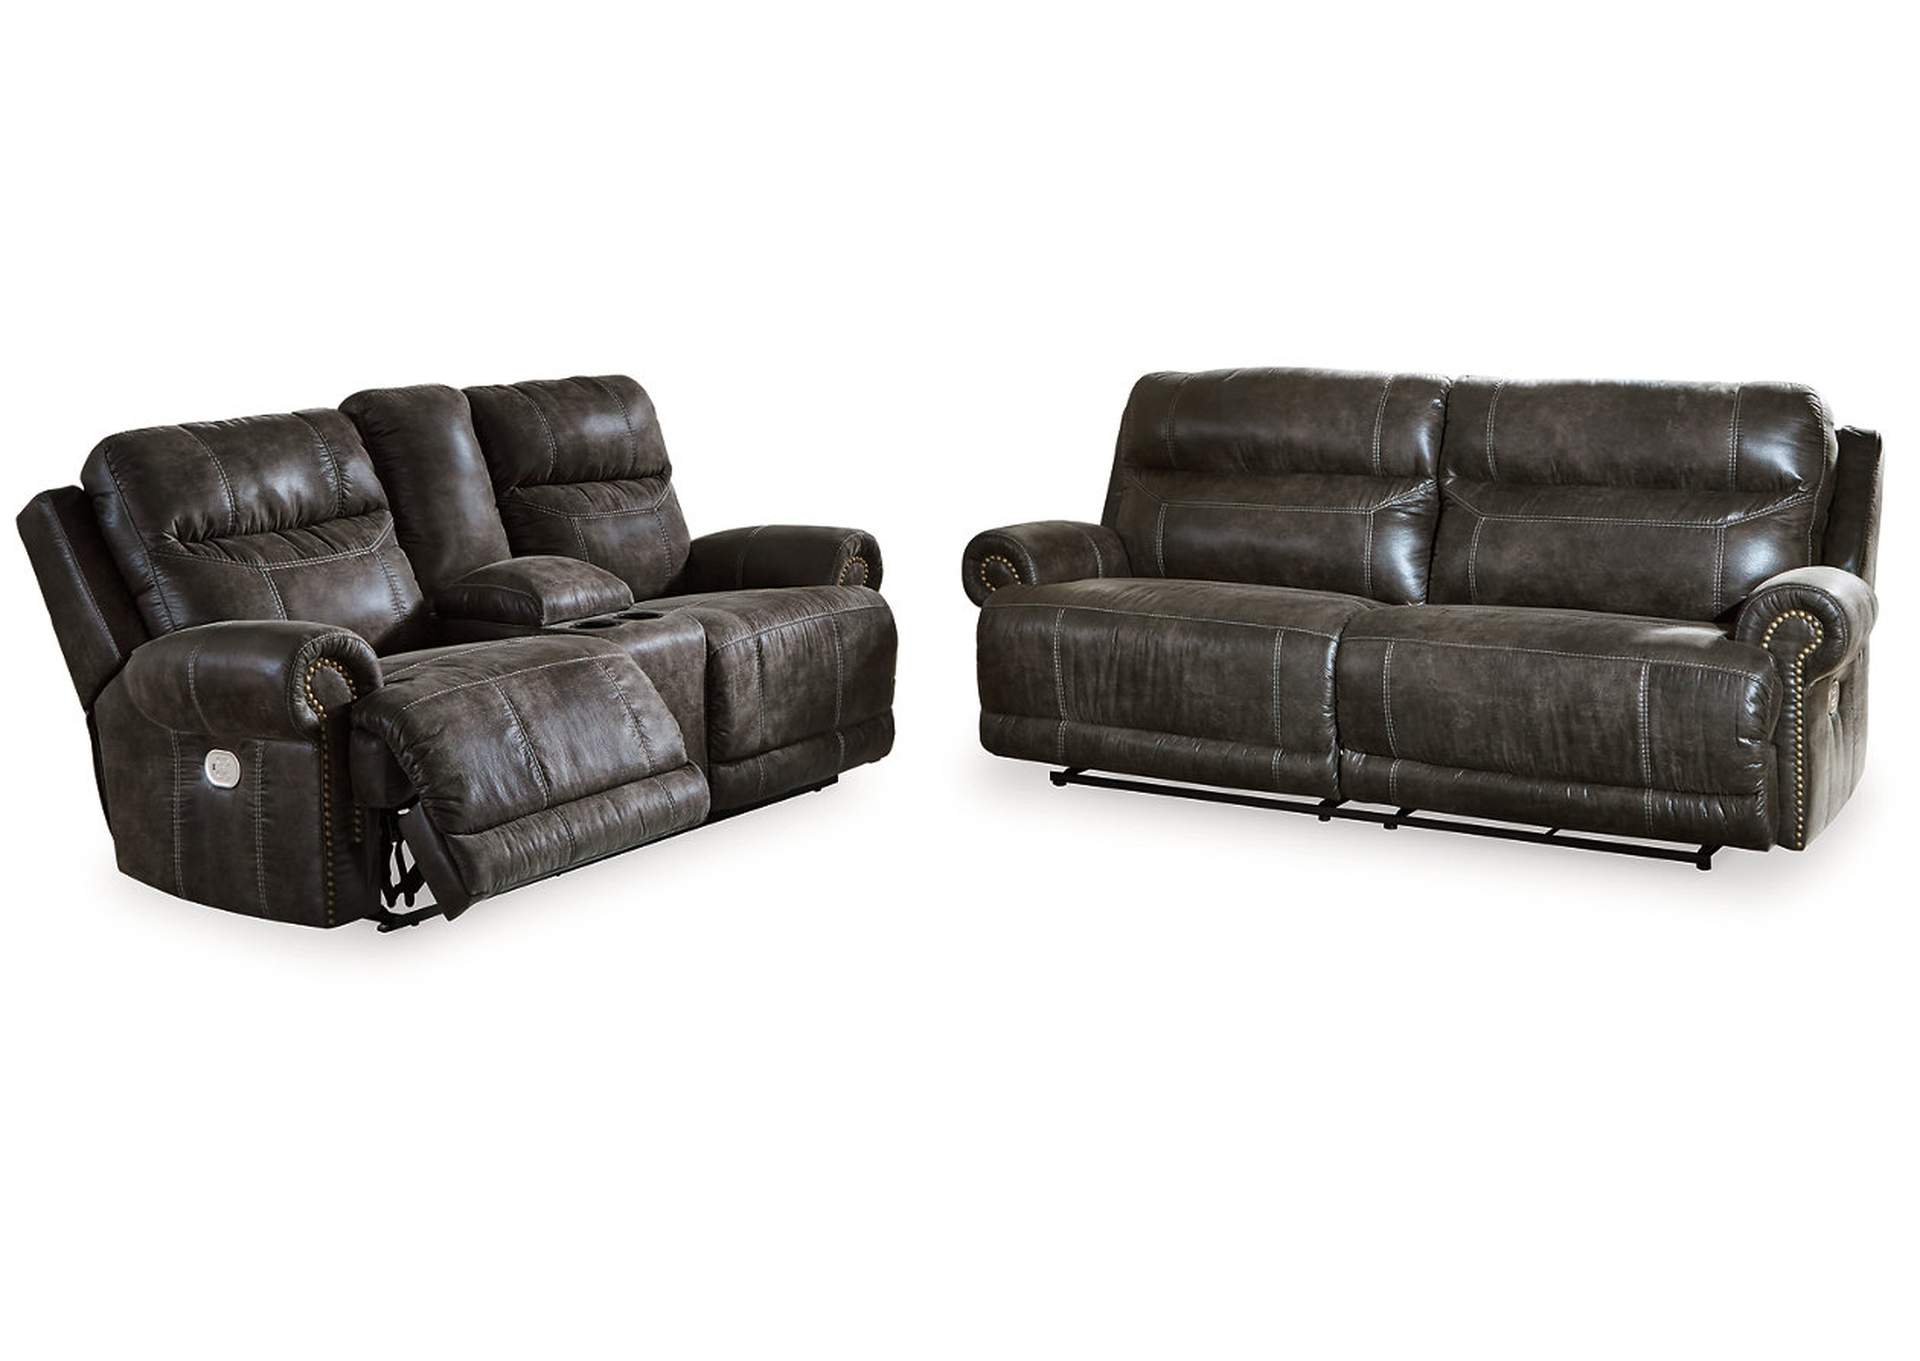 Grearview Sofa and Loveseat,Signature Design By Ashley